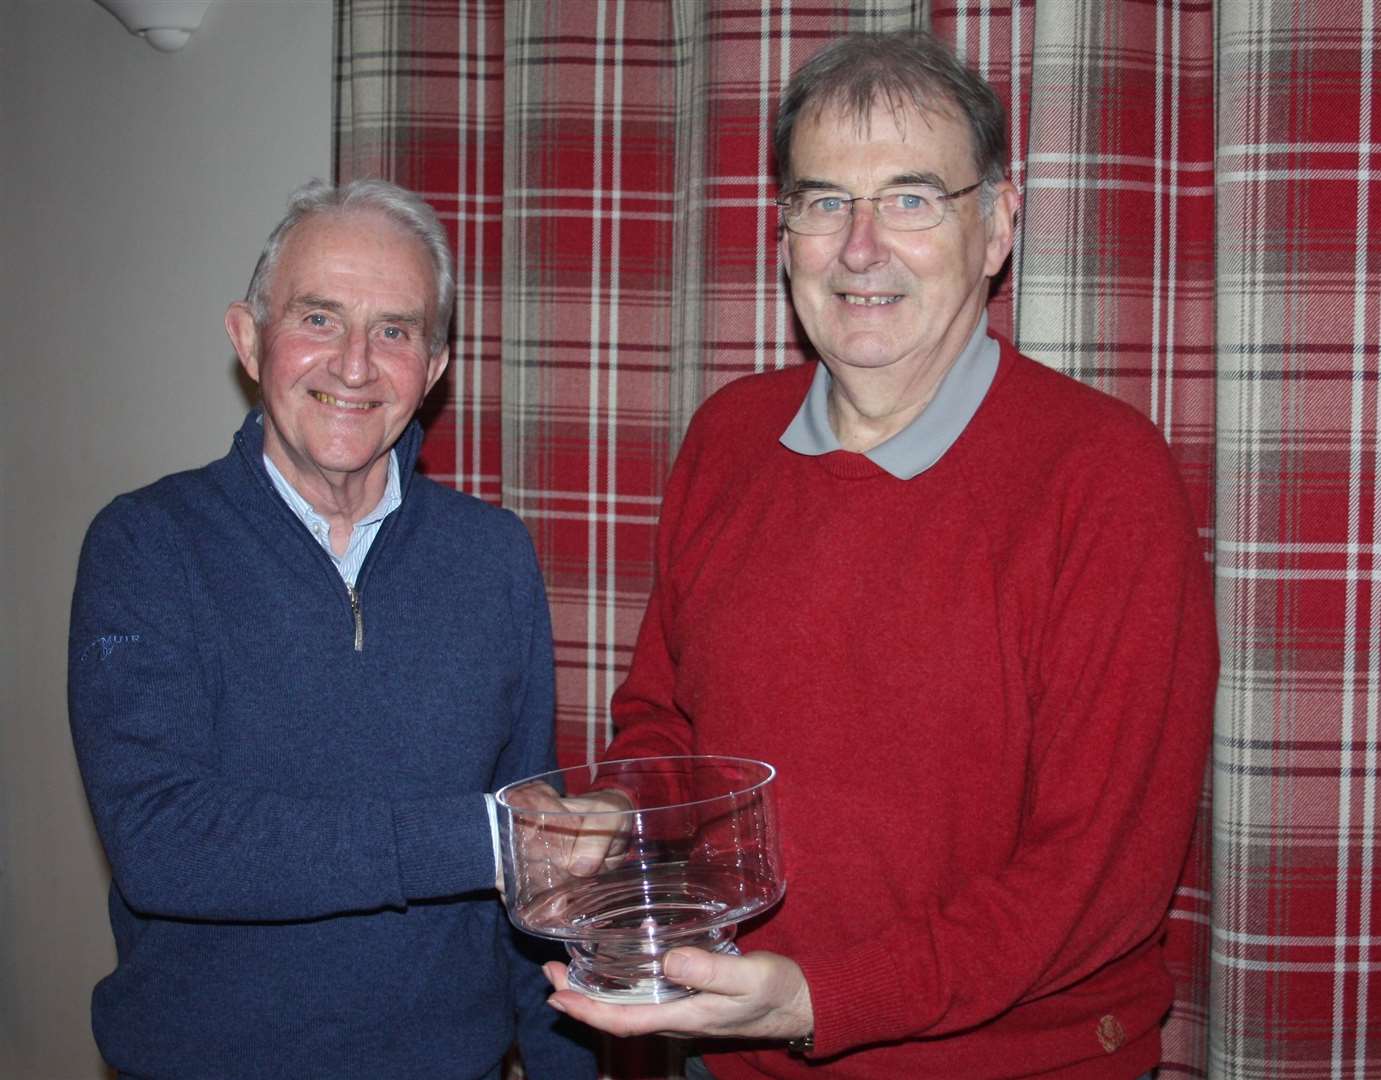 Jock Eunson (right) receiving a glass bowl from Fred Groves for his 25 years of service on the Reay Golf Club committee.